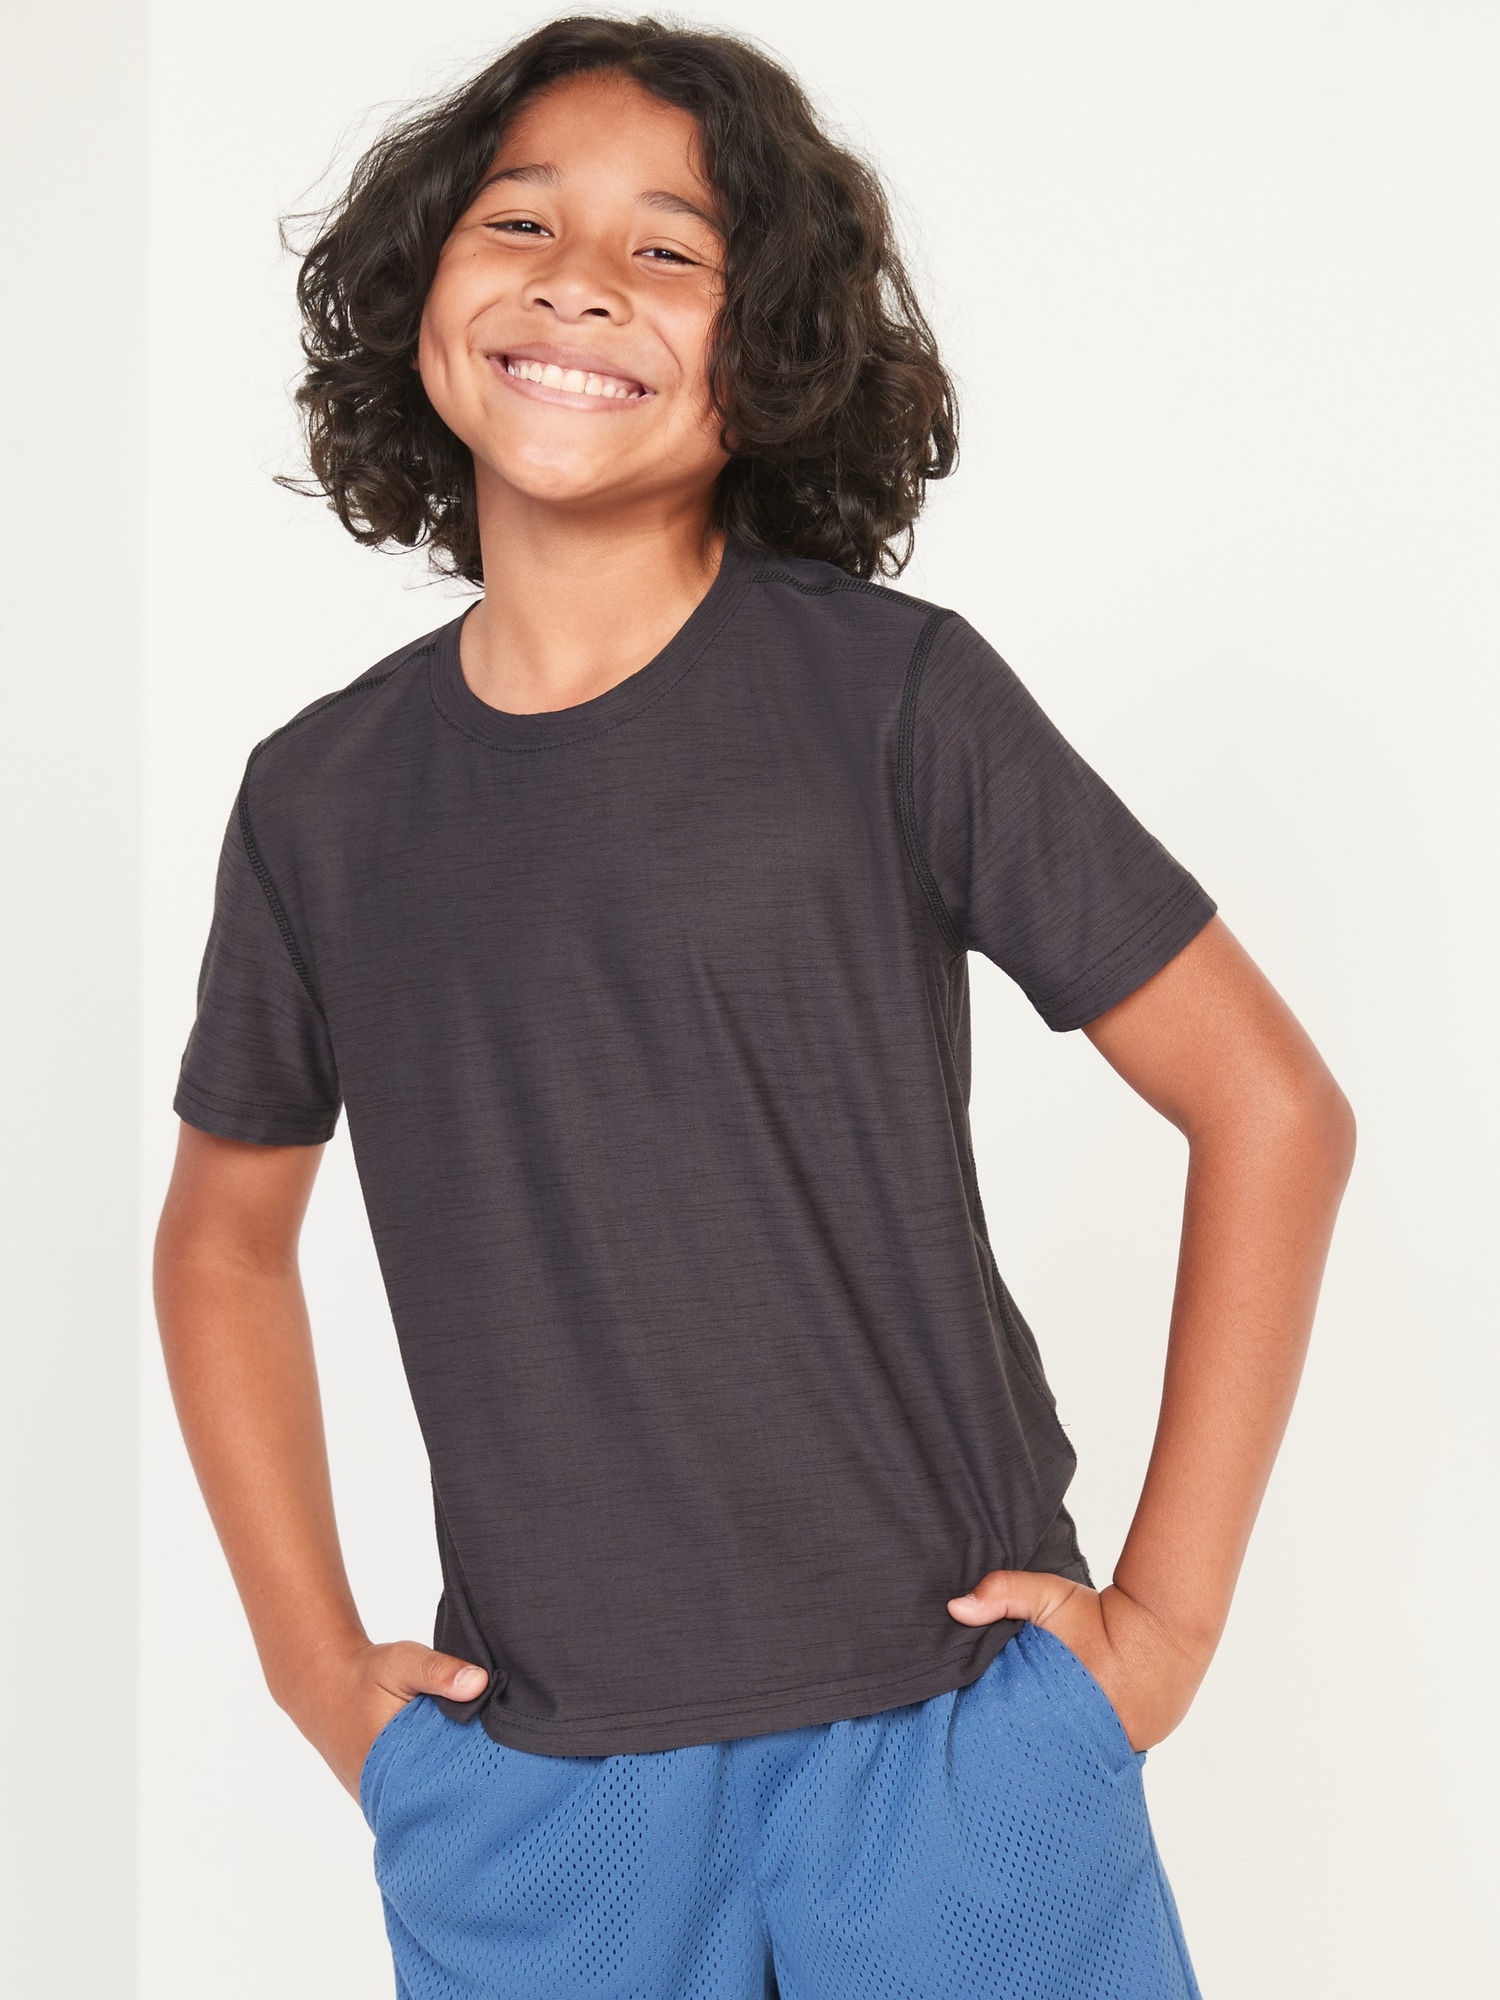 Breathe ON Performance T-Shirt for Boys Hot Deal